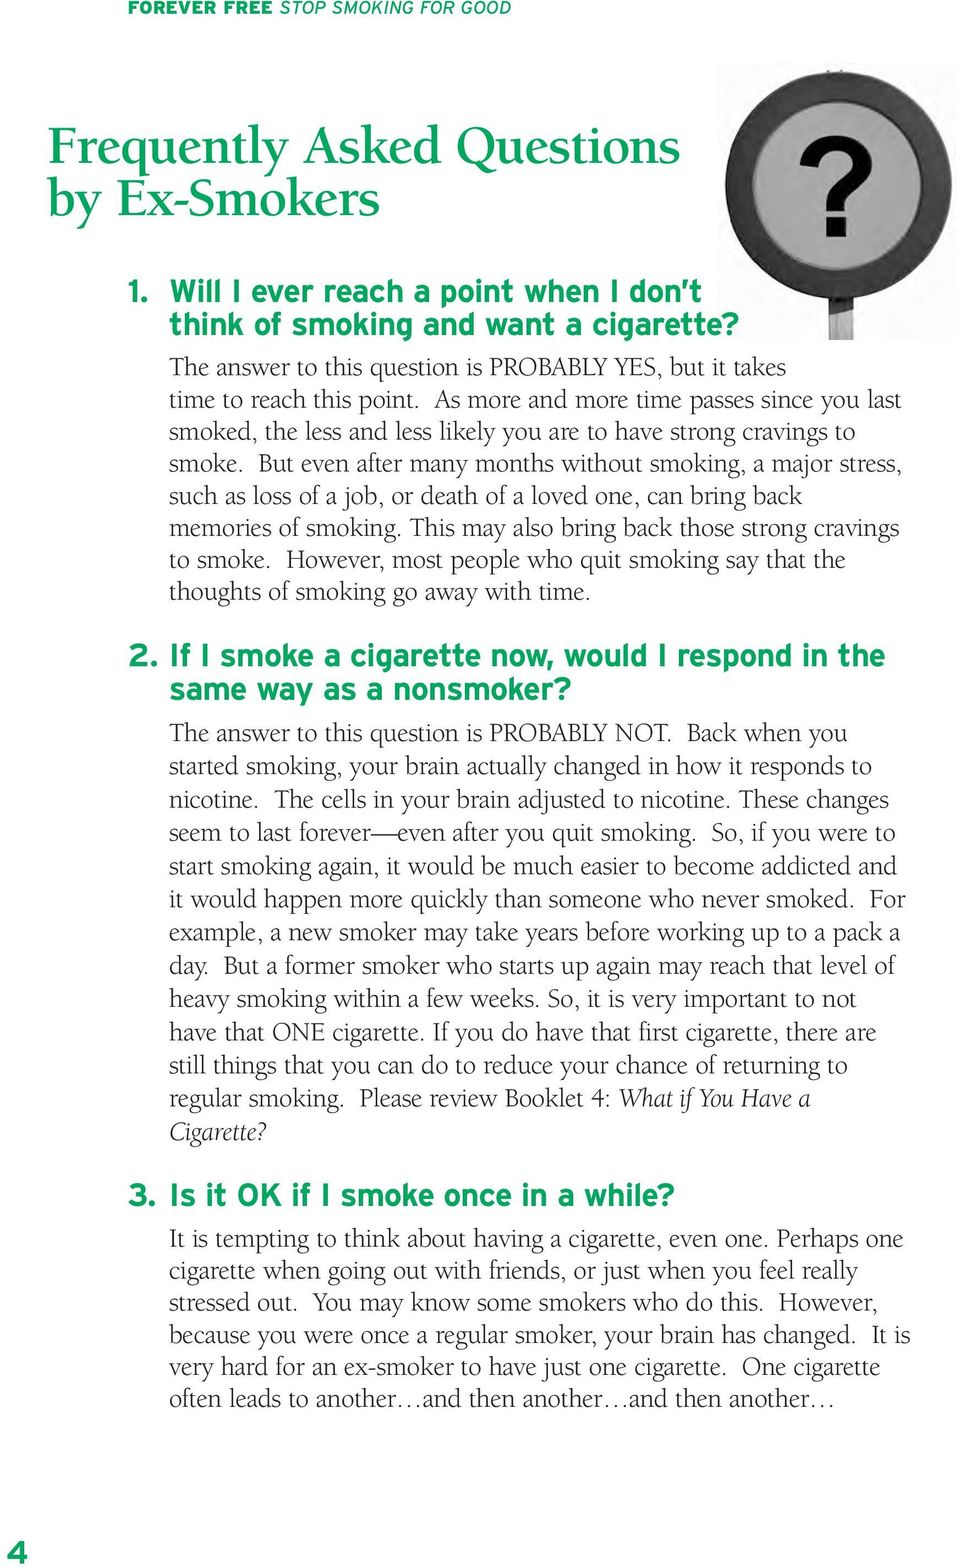 As more and more time passes since you last smoked, the less and less likely you are to have strong cravings to smoke.